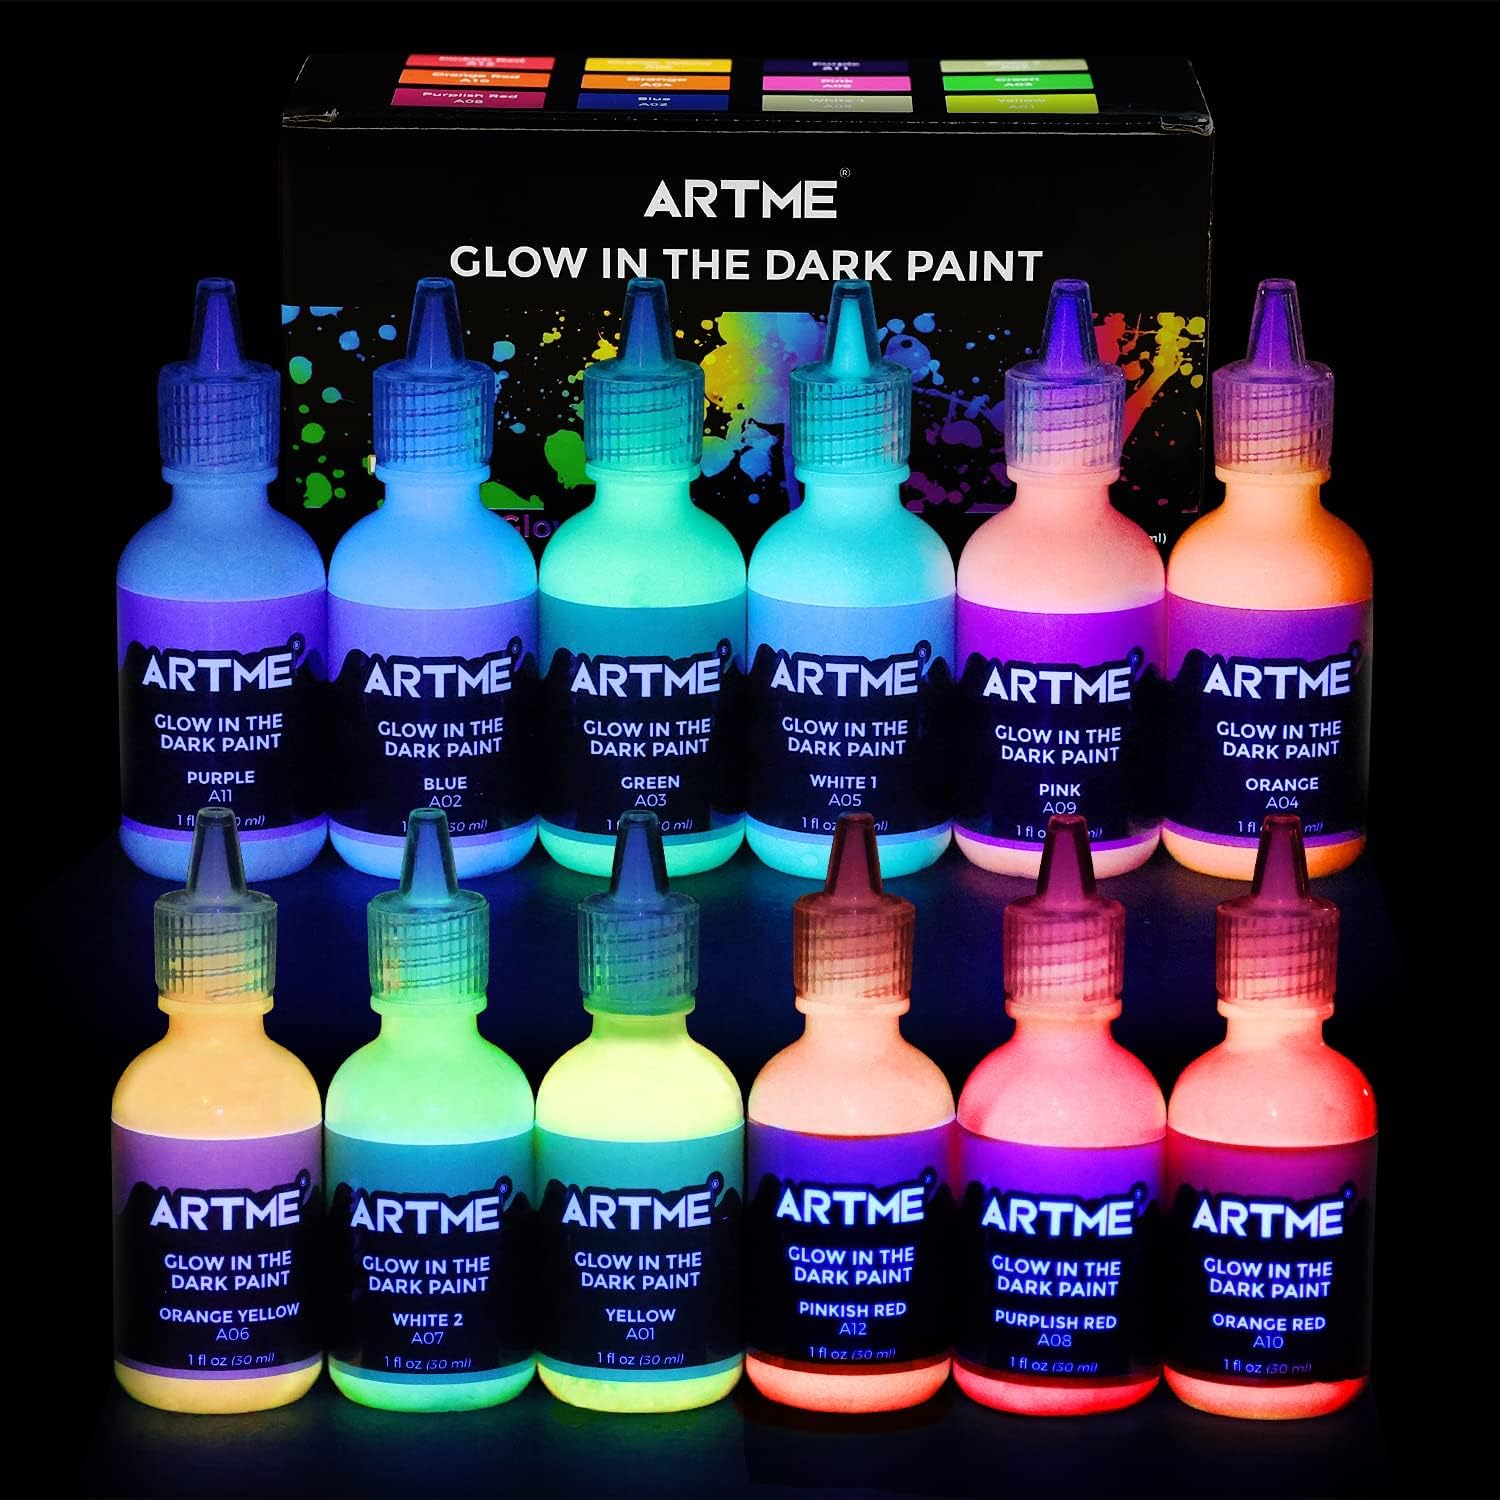 ARTME Glow in The Dark Paint, Glow Paint Set of 12 [...]